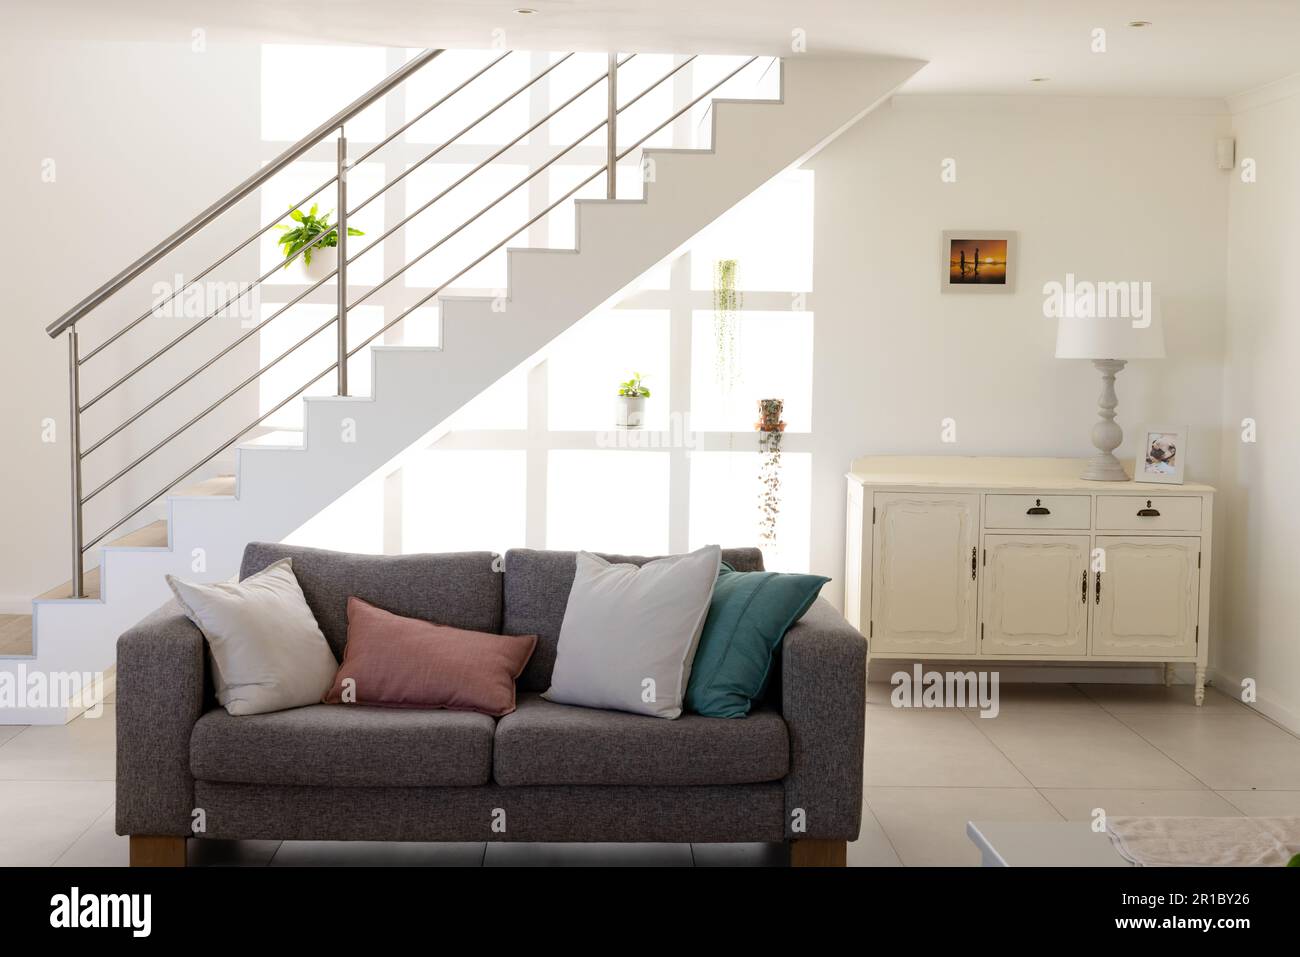 Sofa with cushions arranged against staircase and electric lamp on cabinet in living room at home Stock Photo